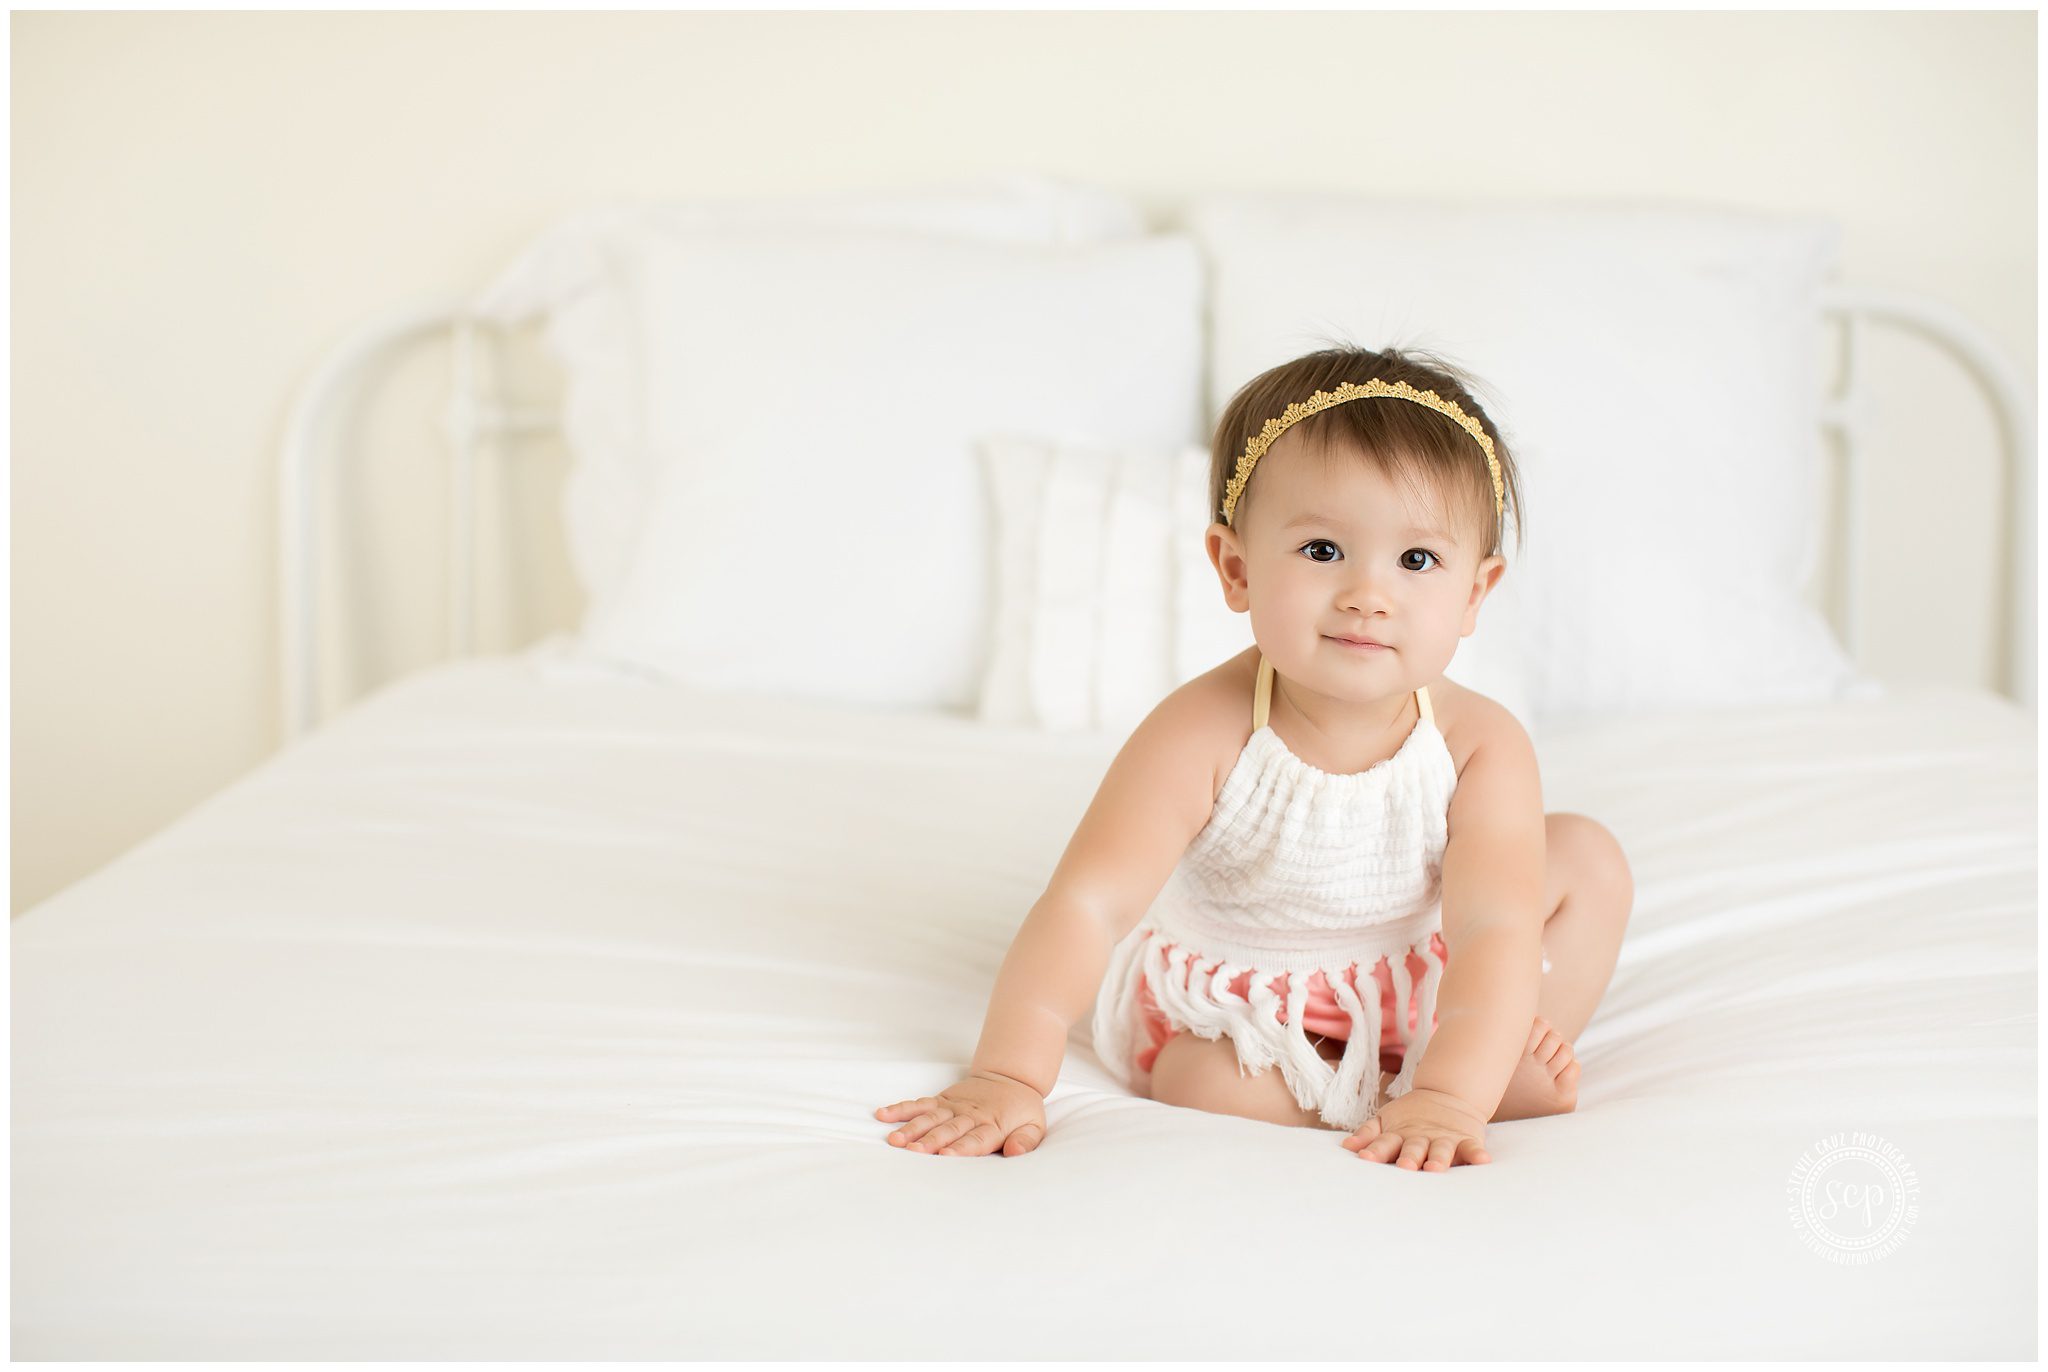 Stevie Cruz is a great child photographer. She captures this little girl for her one year old birthday photo session